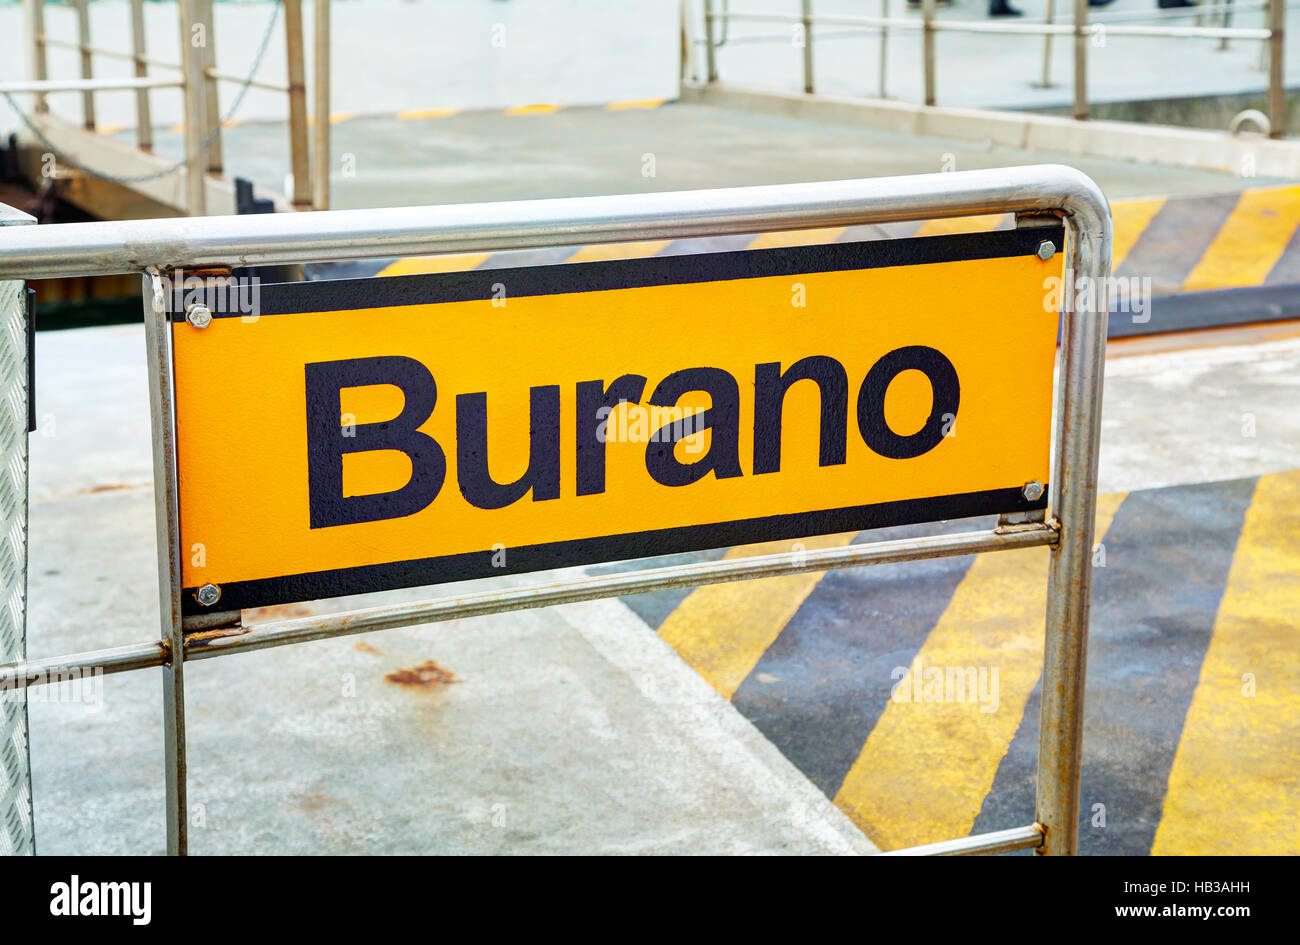 Burano sign at the vaporetto stop Stock Photo